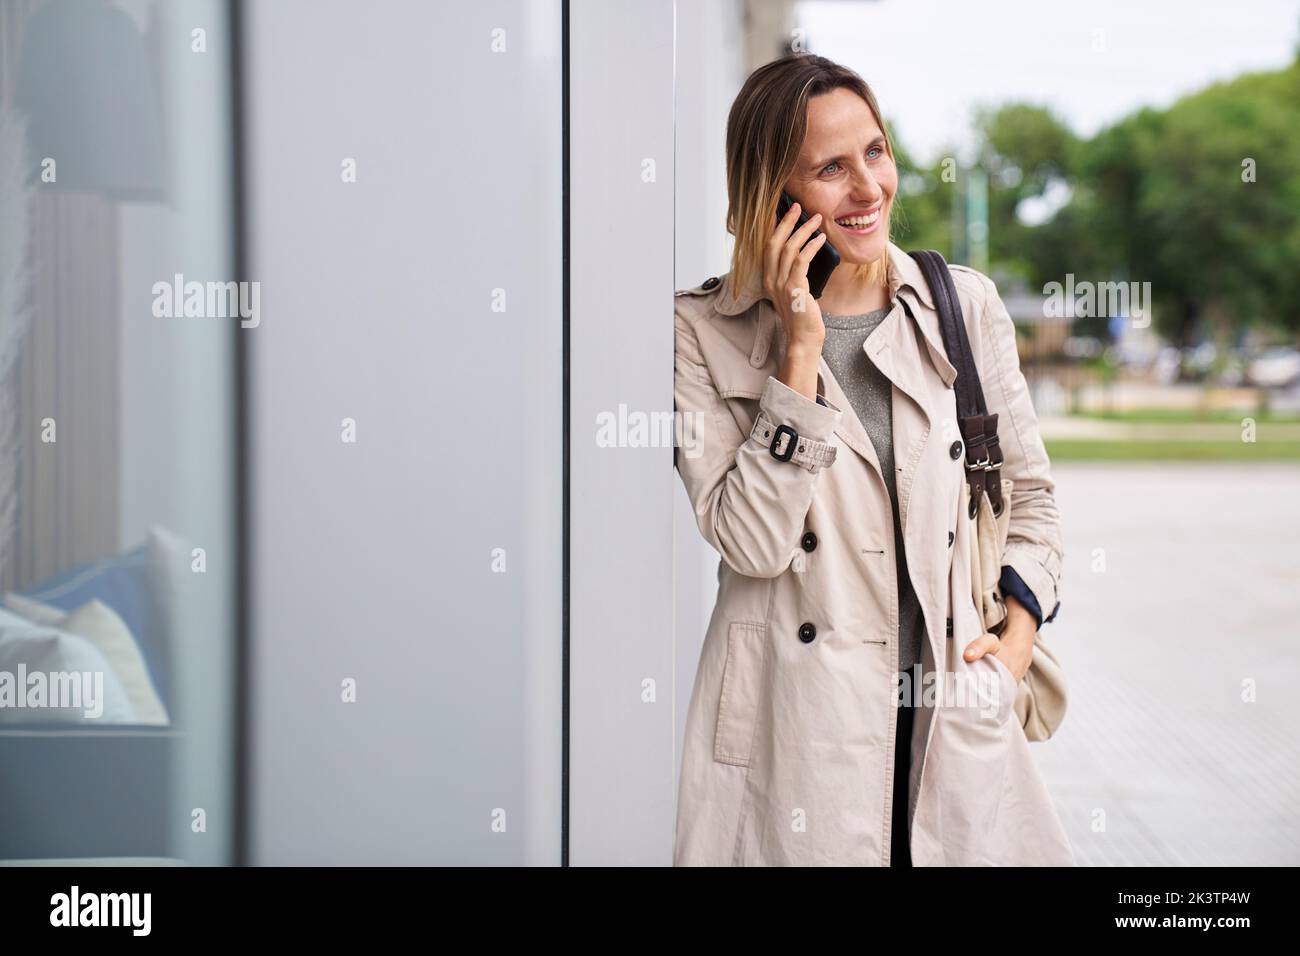 Photo of smiling woman with raincoat speaking on mobile phone in the street Stock Photo